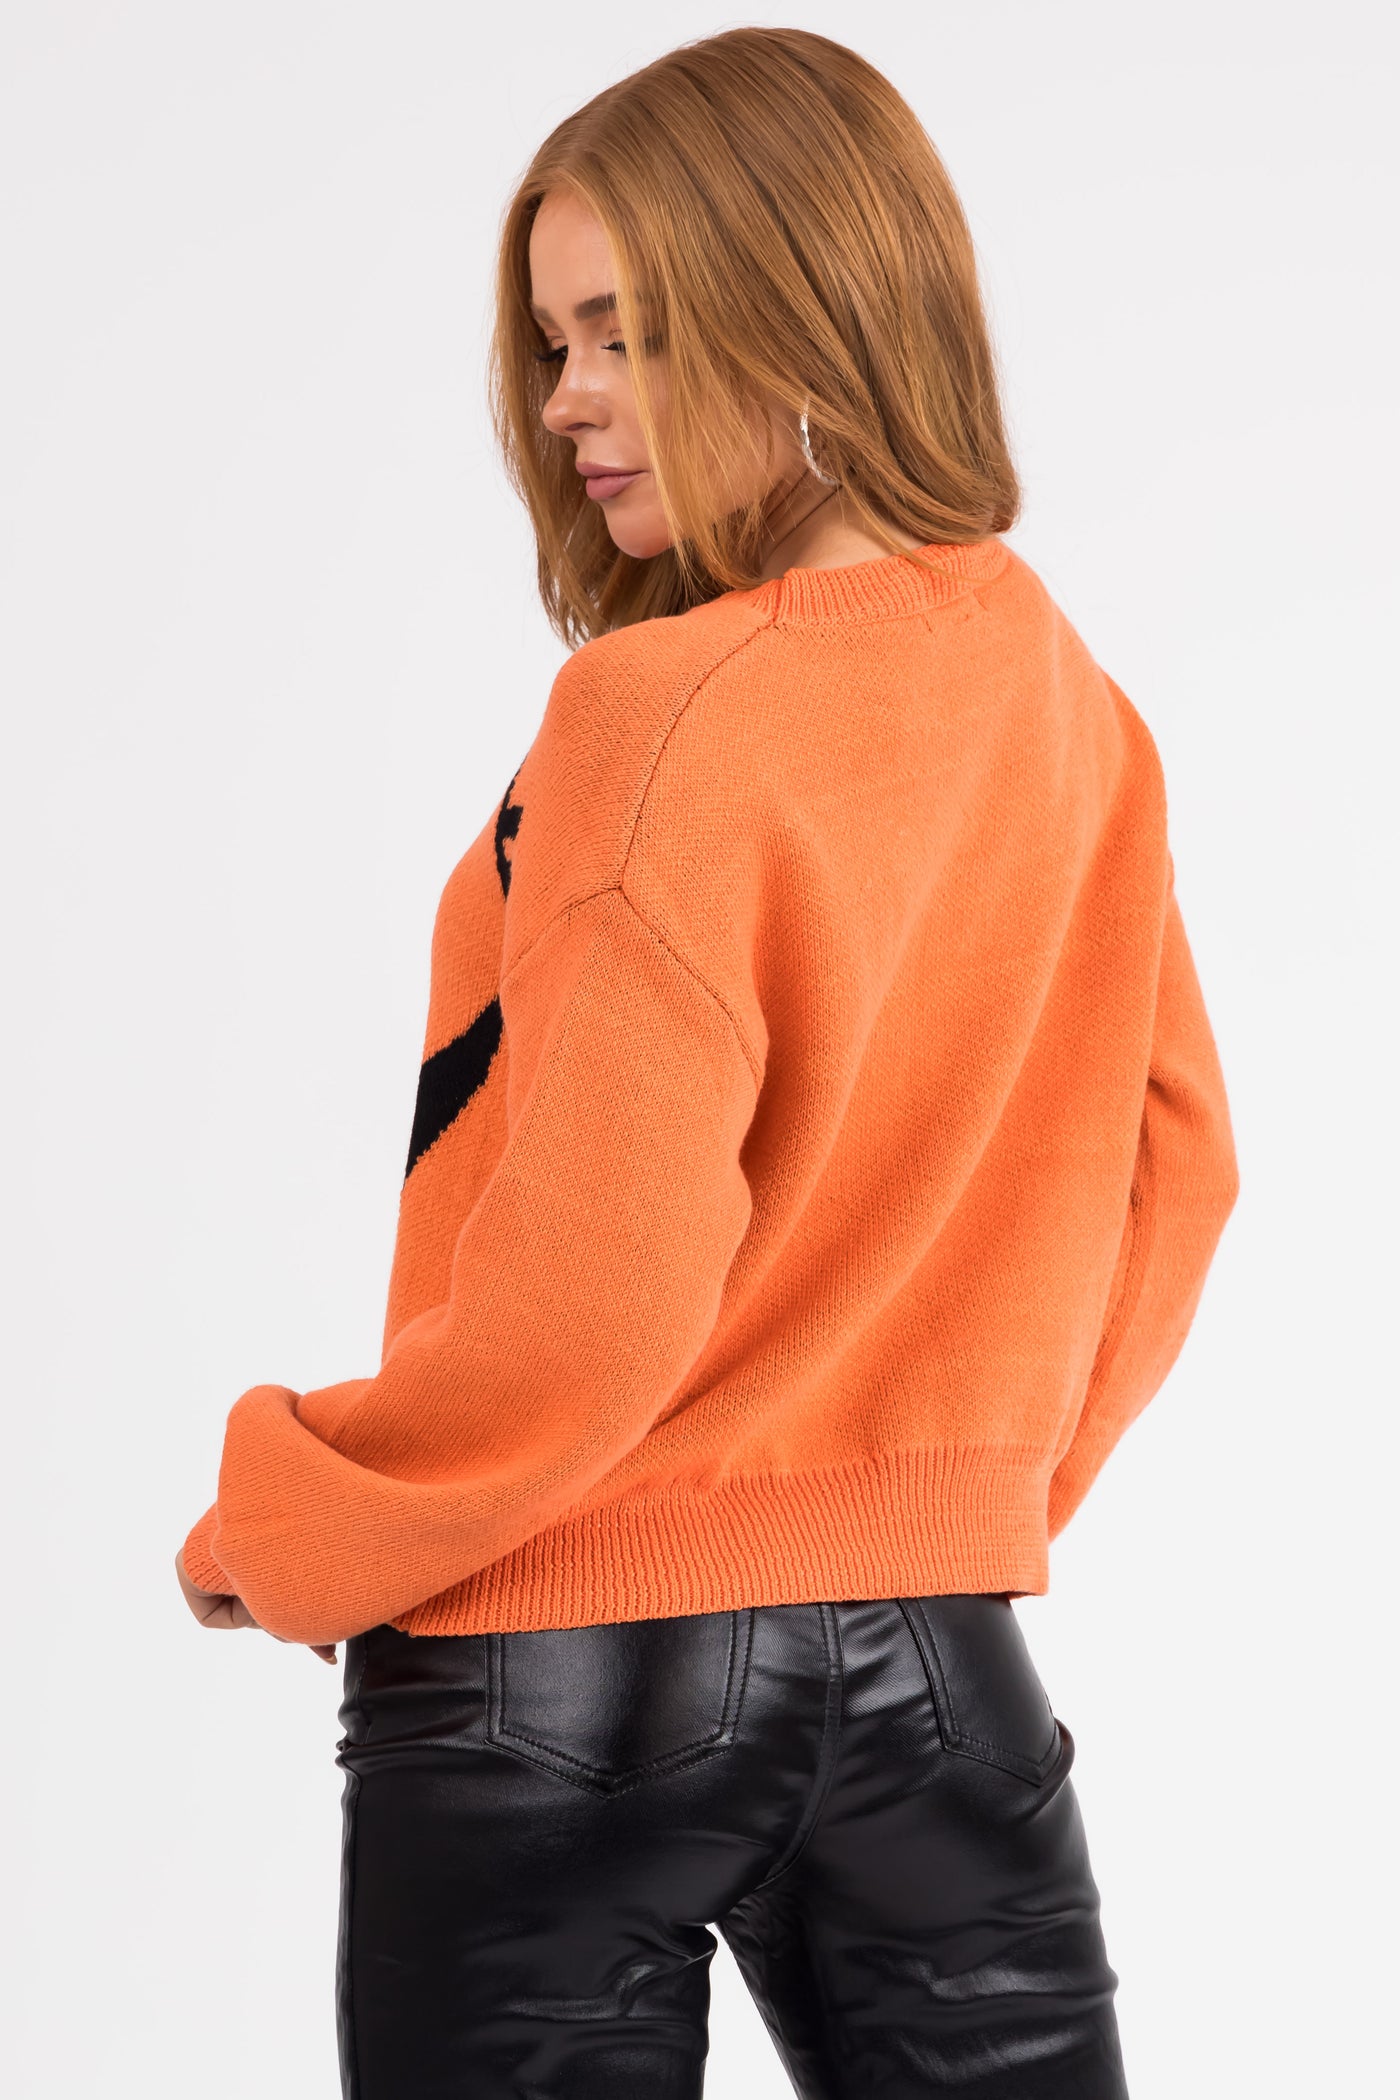 Pumpkin and Black Graphic Long Sleeve Sweater